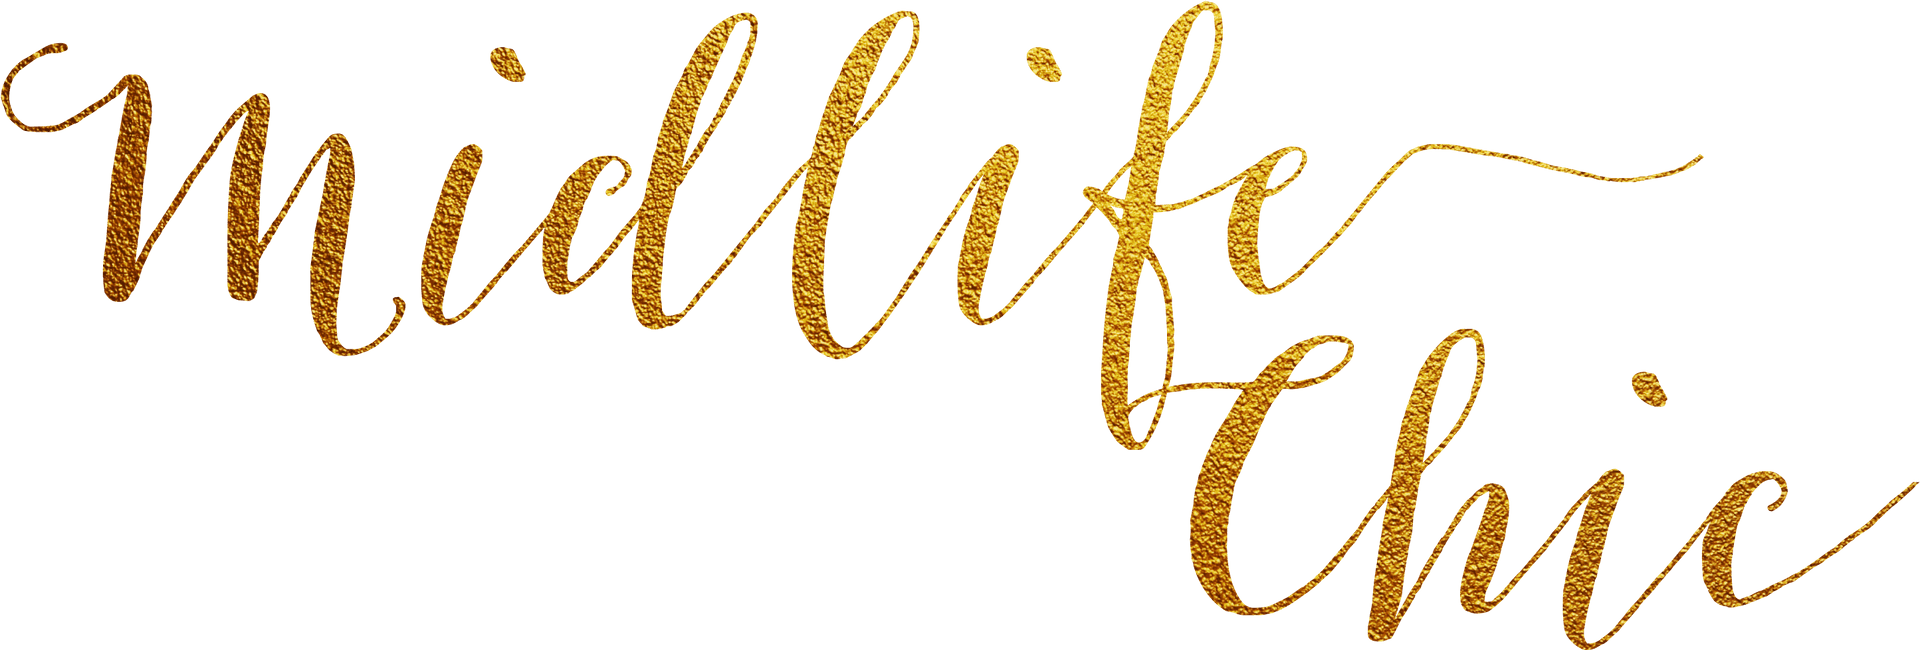 Midlife Chic_ Golden Text_ Design PNG